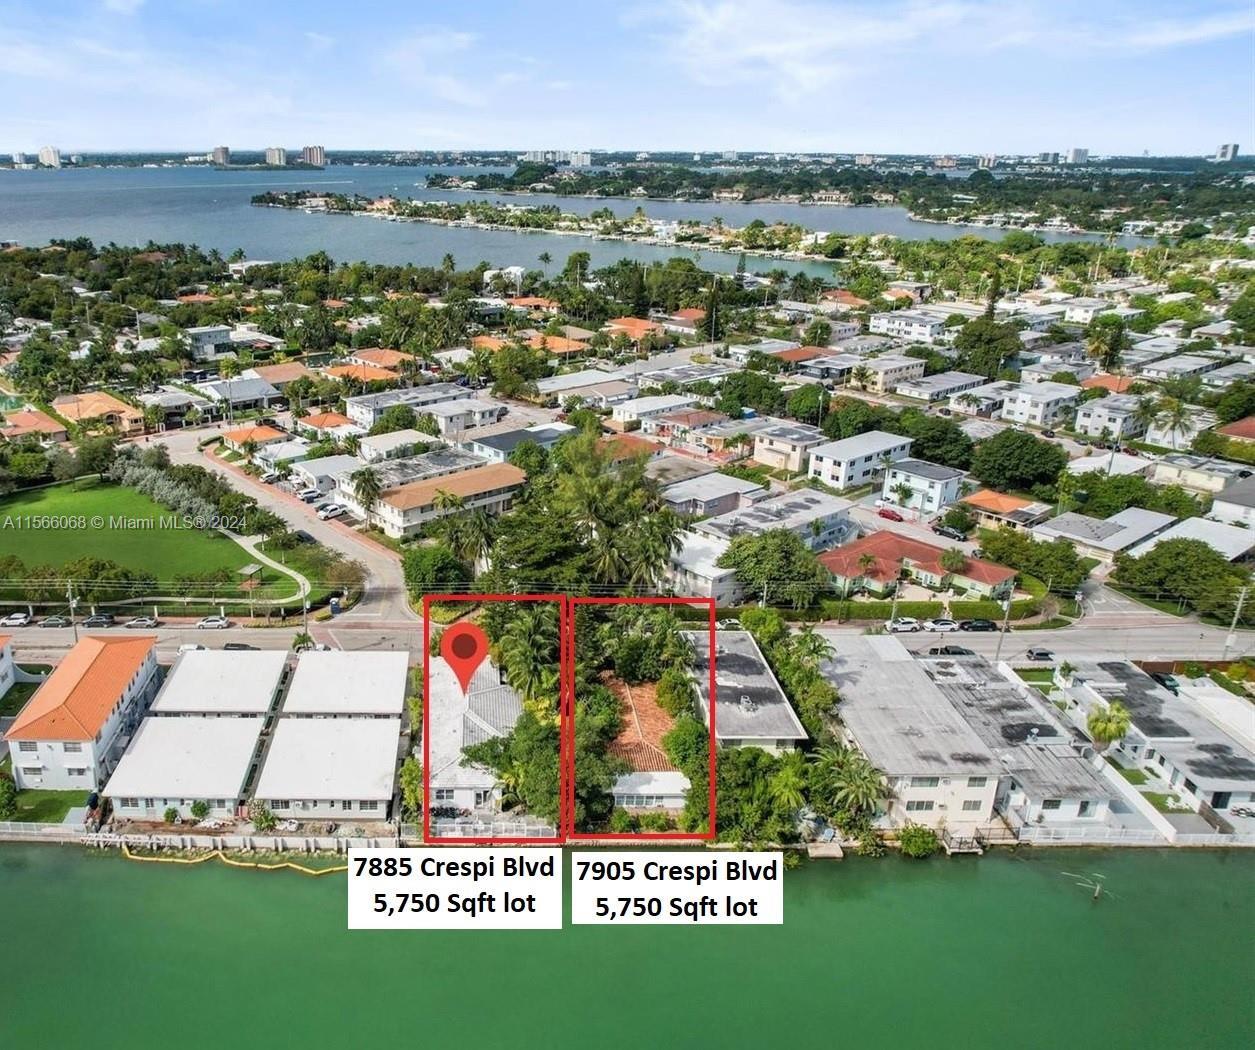 Waterfront Fourplex in Biscayne Point. The lot is 5,750 SQFT with the option to buy the fourplex nex